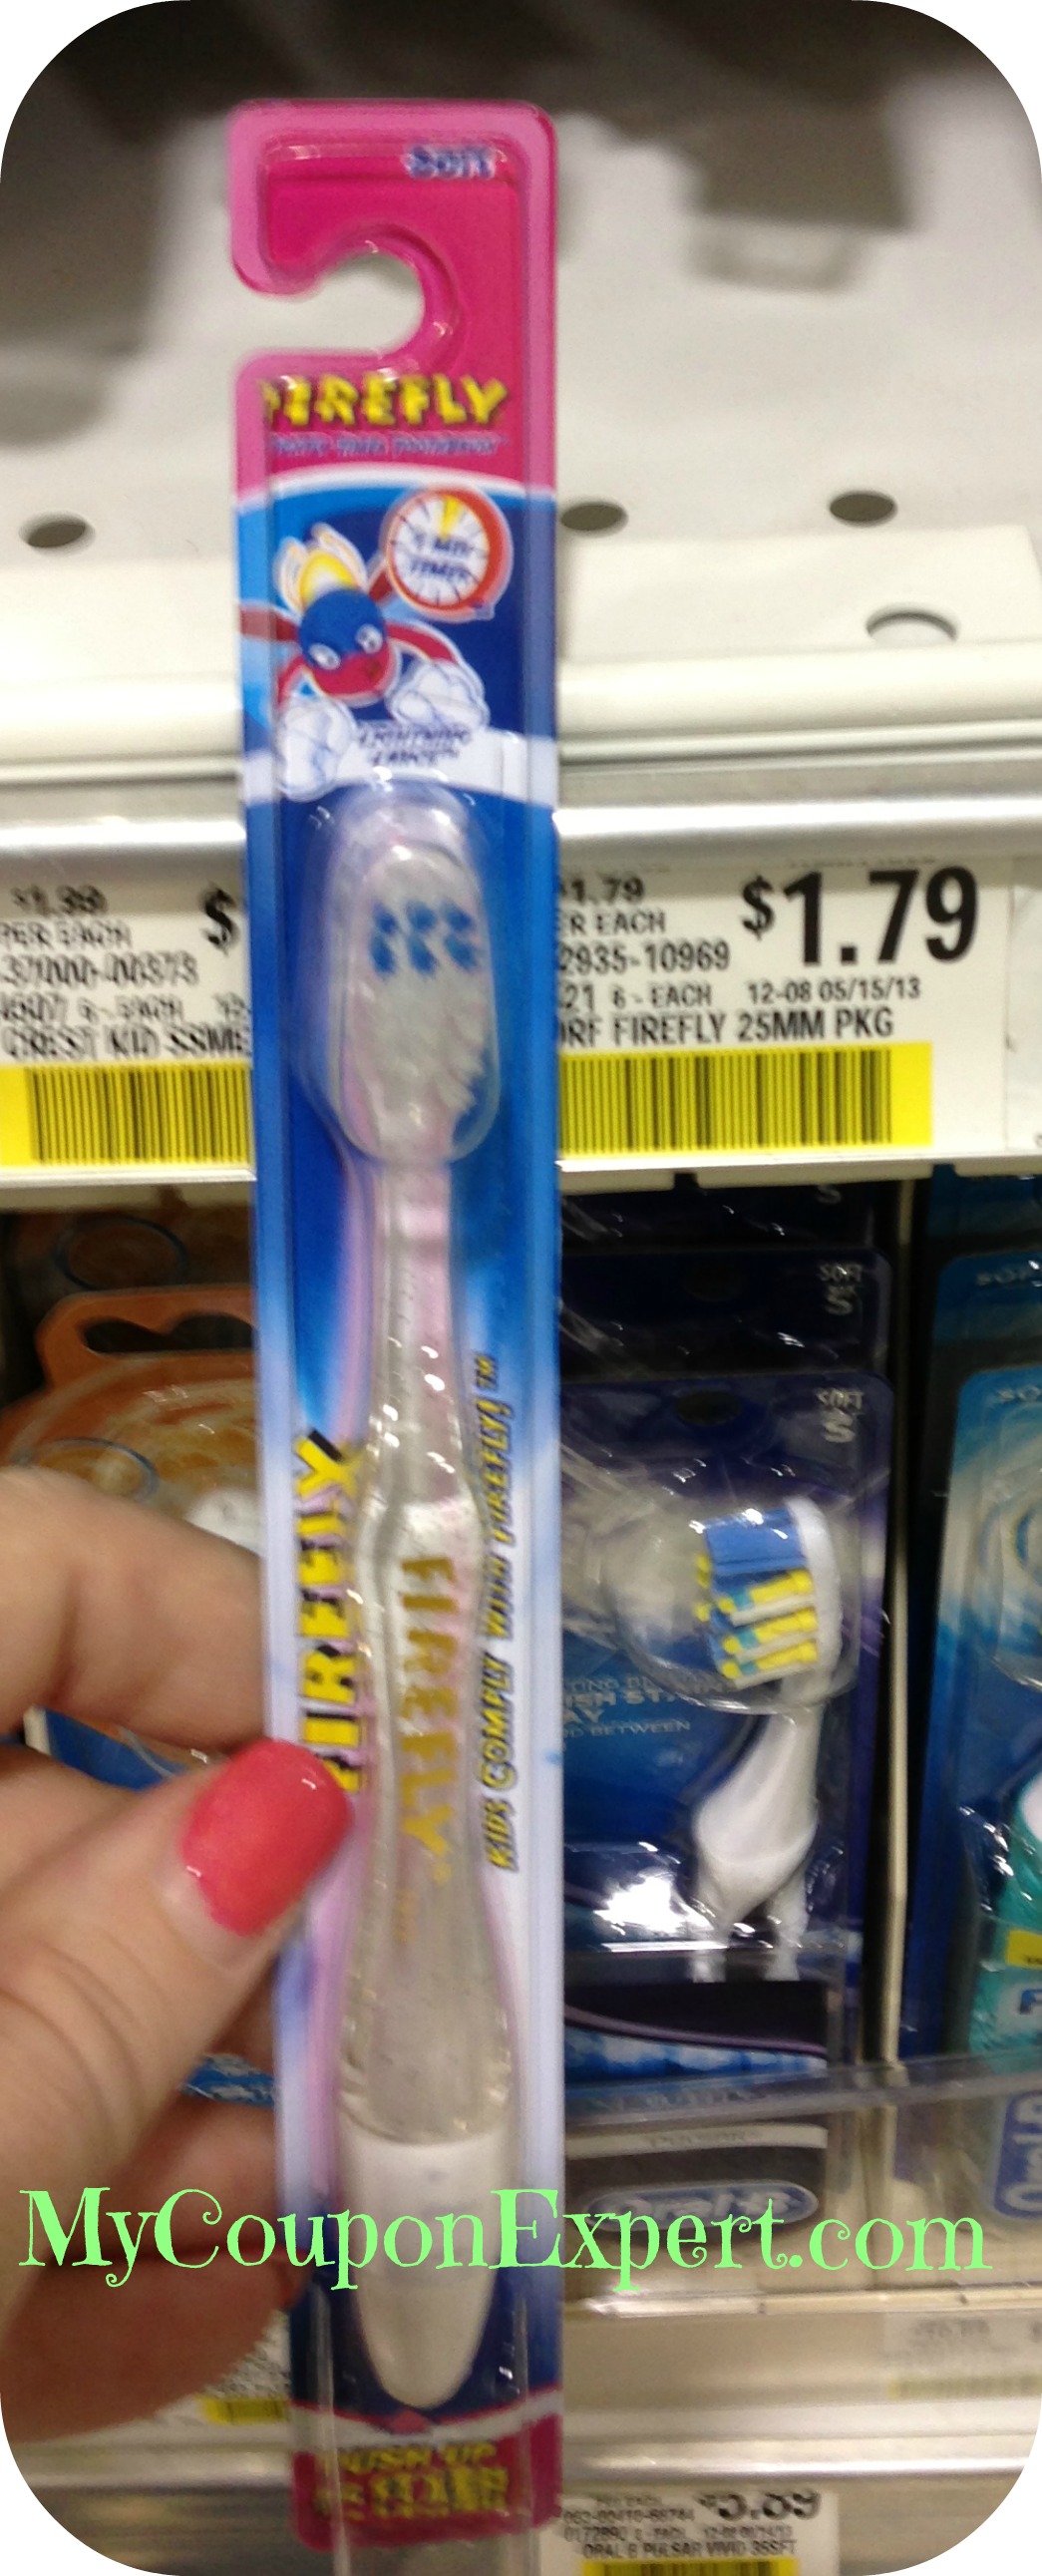 Publix Hot Deal Alert! Firefly Toothbrush Only $0.89 Until 12/19